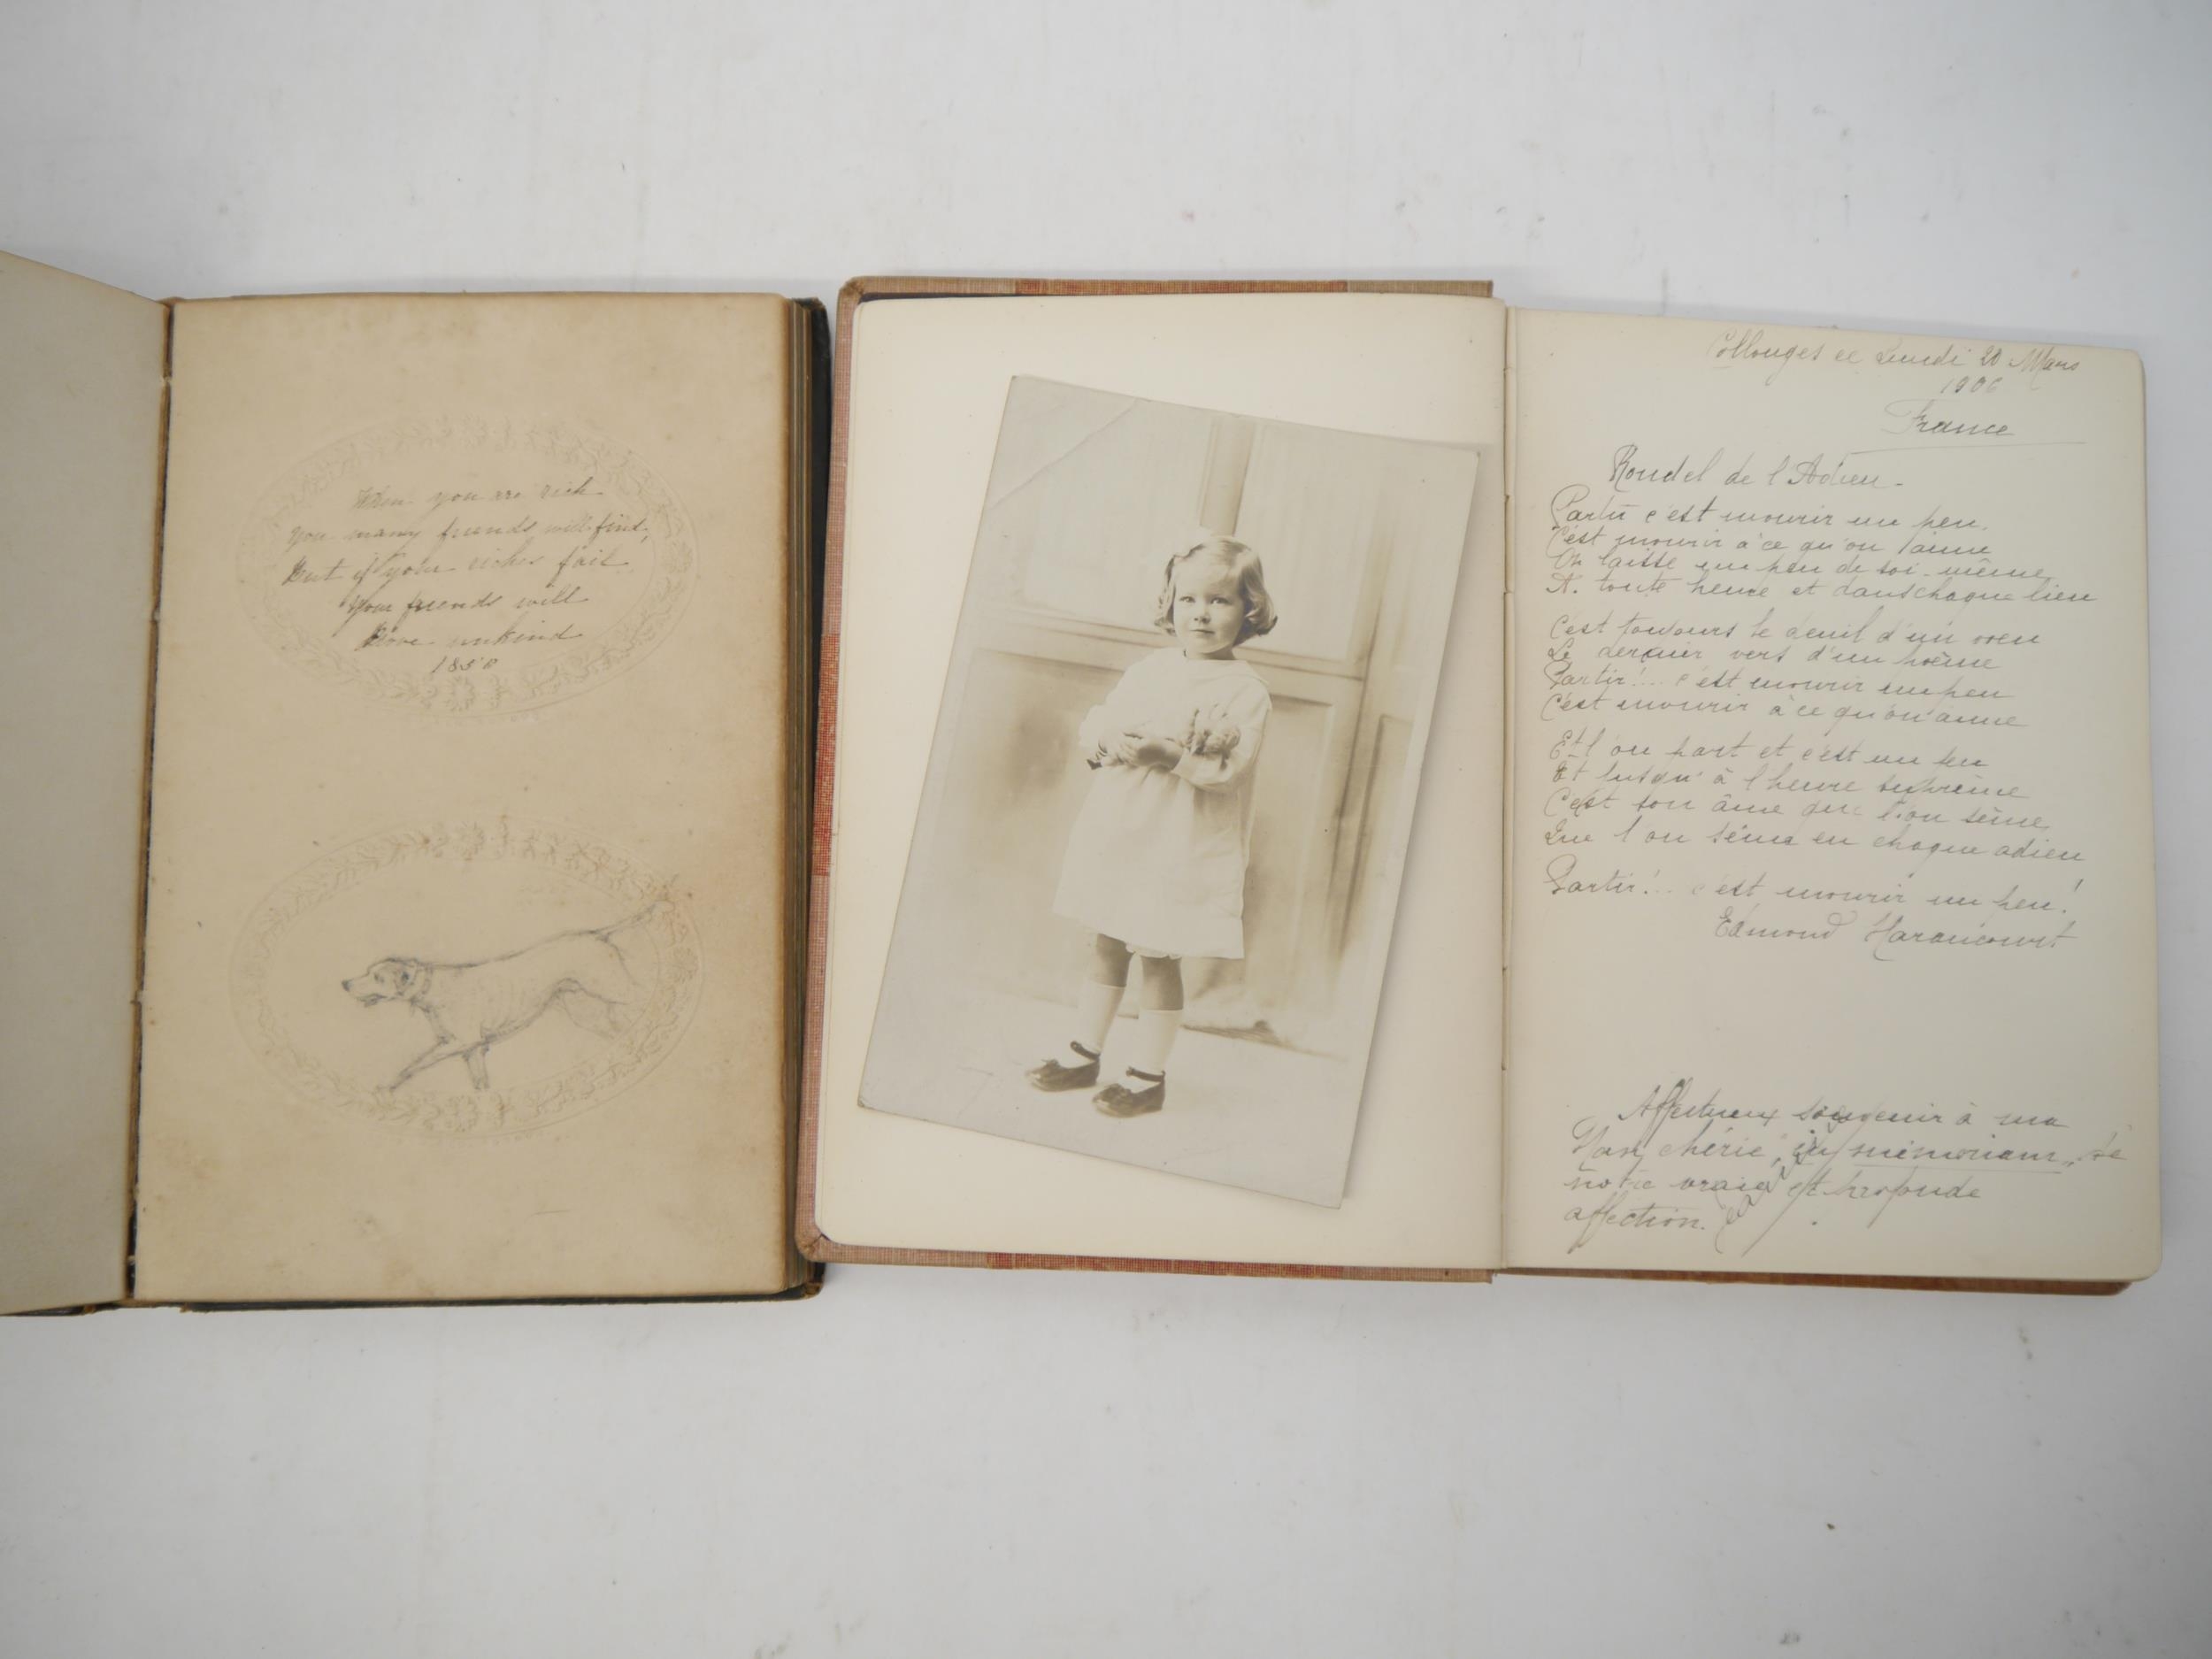 A commonplace album circa 1850 compiled by one Harriet Emma Easton, Woodrow Farm, Cawston, - Image 2 of 4